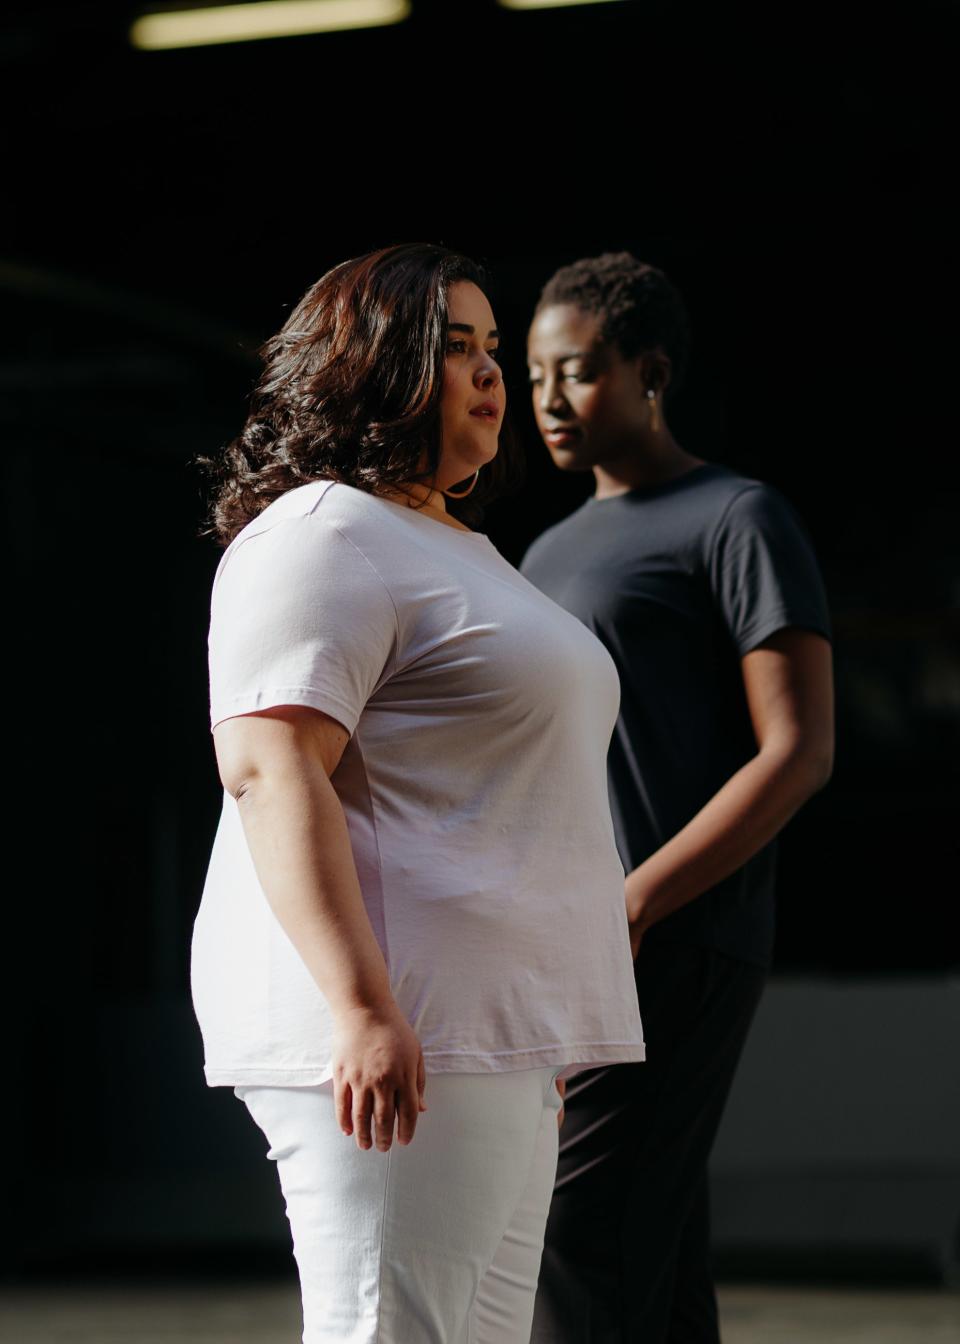 And Comfort, a new plus-size clothing brand launching today, wants to be your go-to for size-inclusive minimalist design.